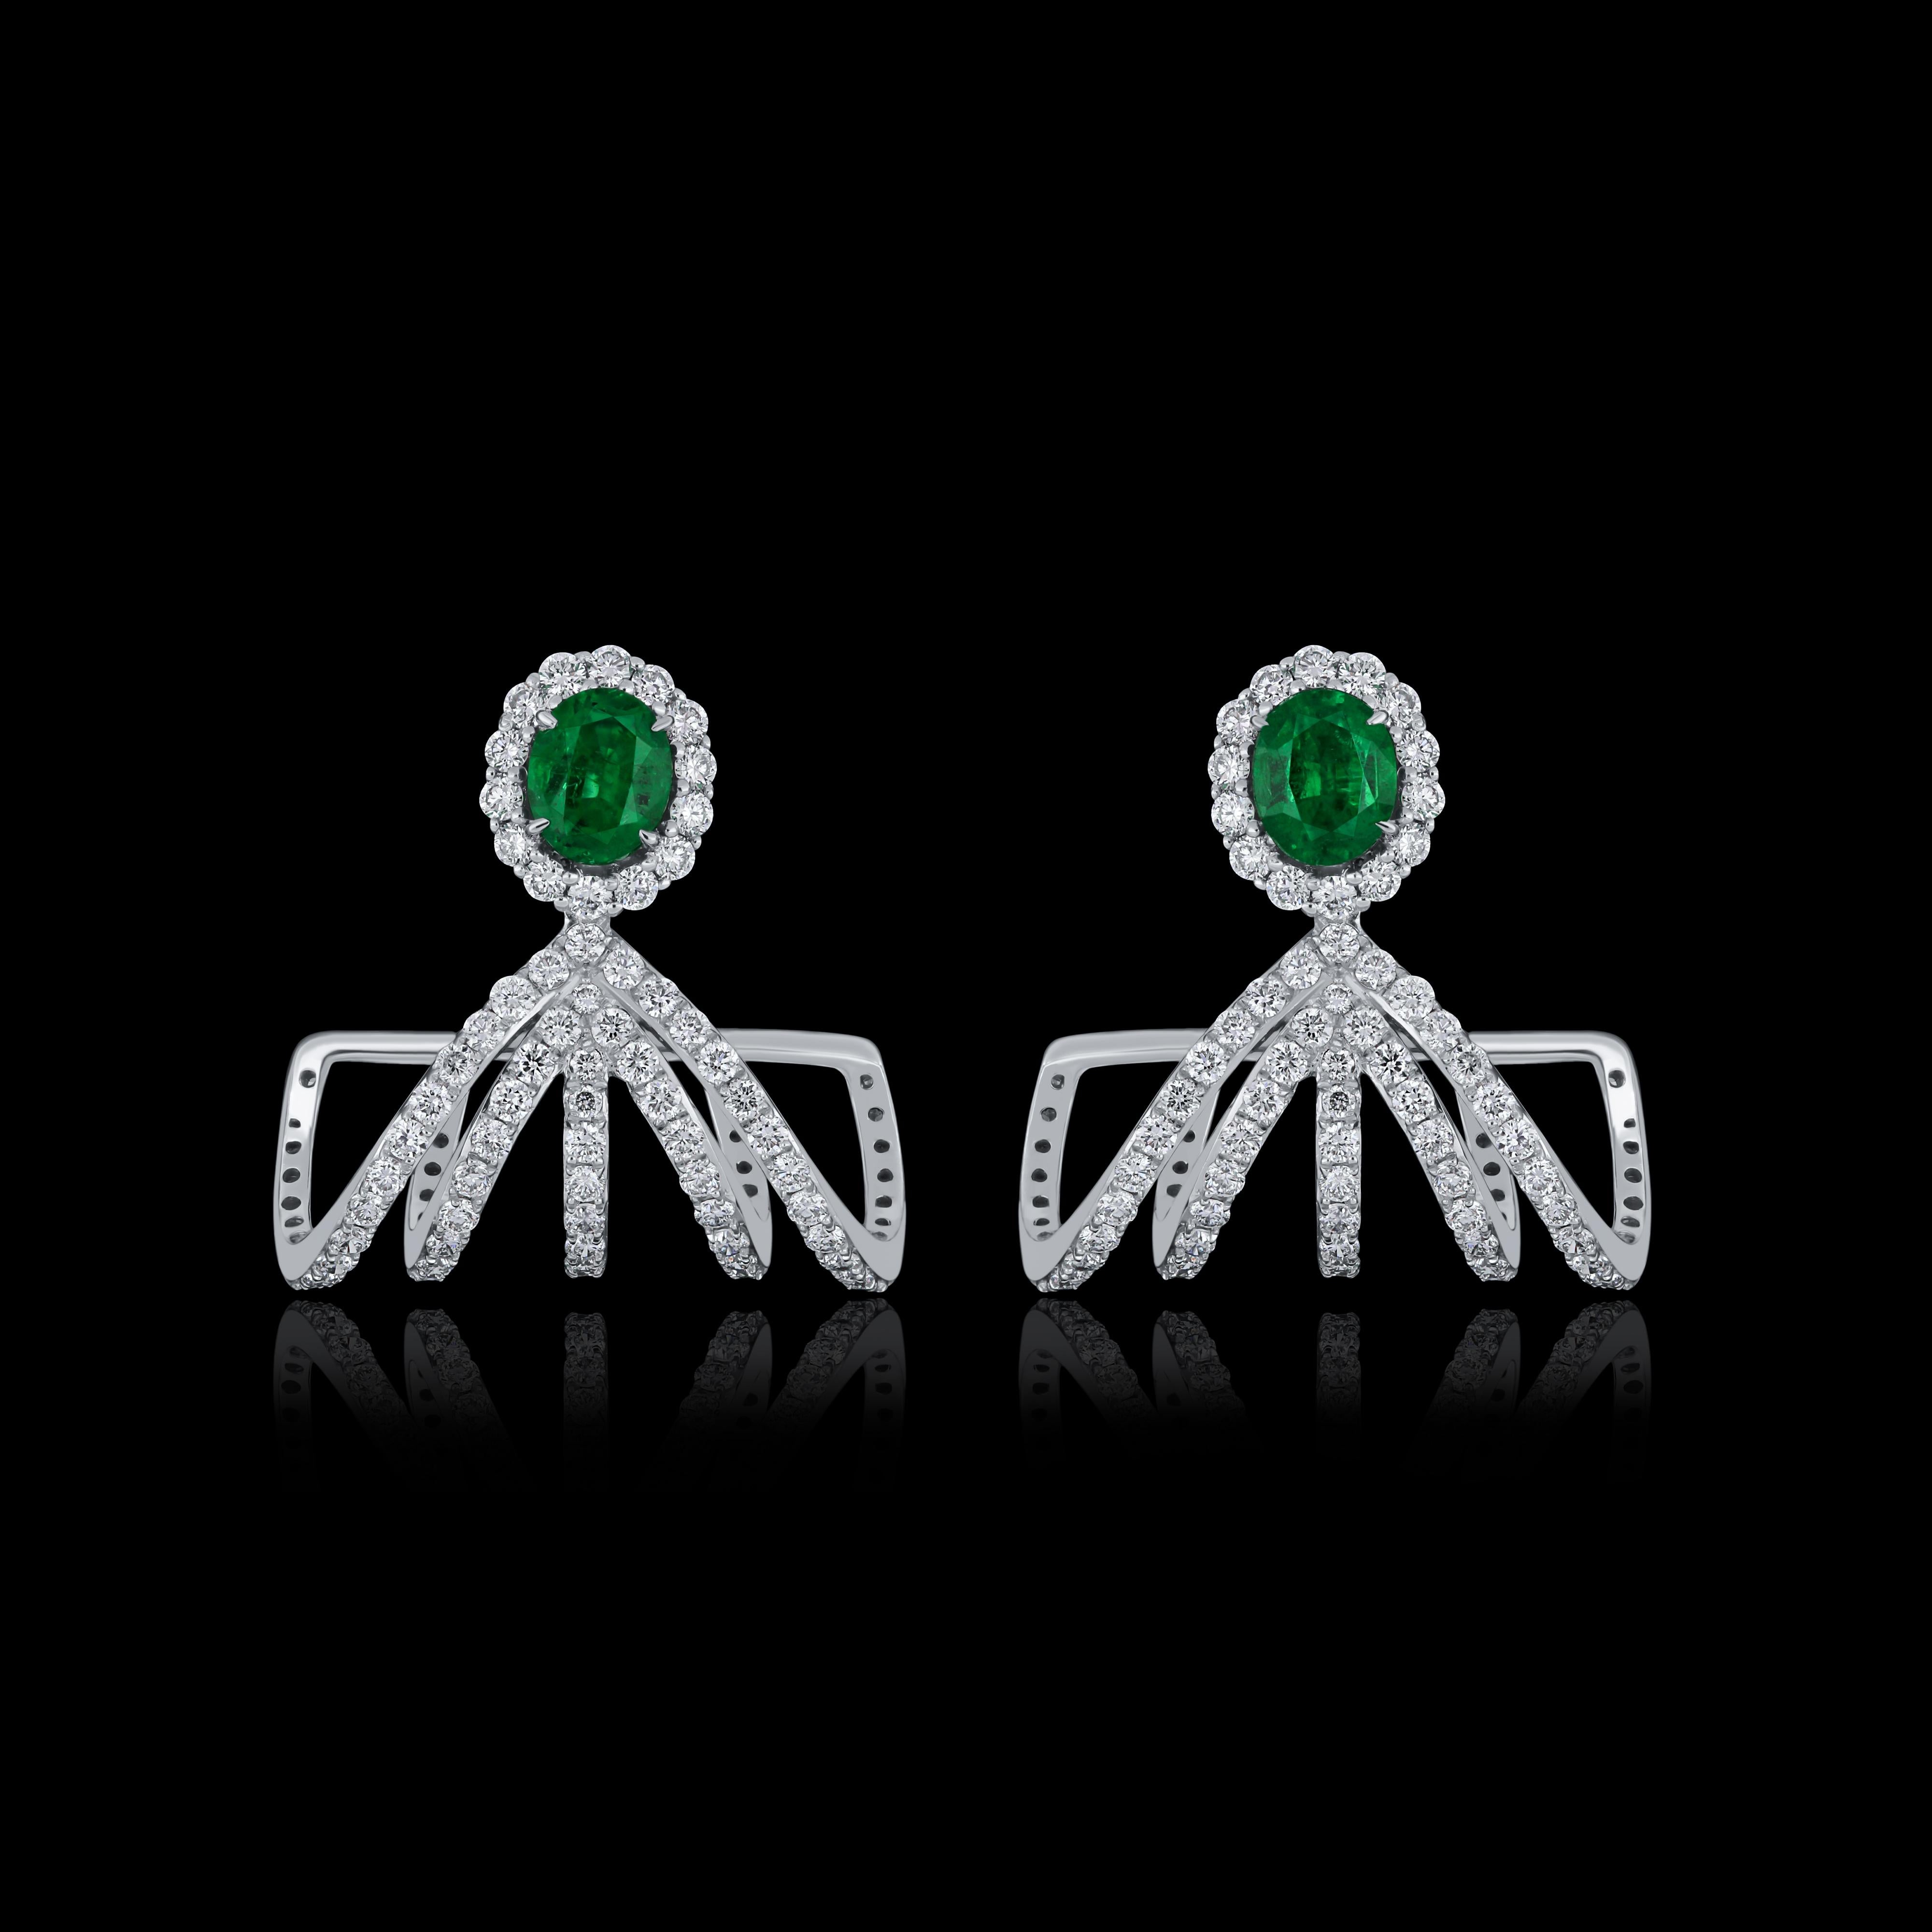 Elegant and exquisitely detailed 18 Karat White Gold Earring, center set with 0.64Cts .Oval Shape Emerald and micro pave set Diamonds, weighing approx. 1.41Cts Beautifully Hand crafted in 18 Karat White Gold.

Stone Detail:
Emerald: 5x4MM

Stone